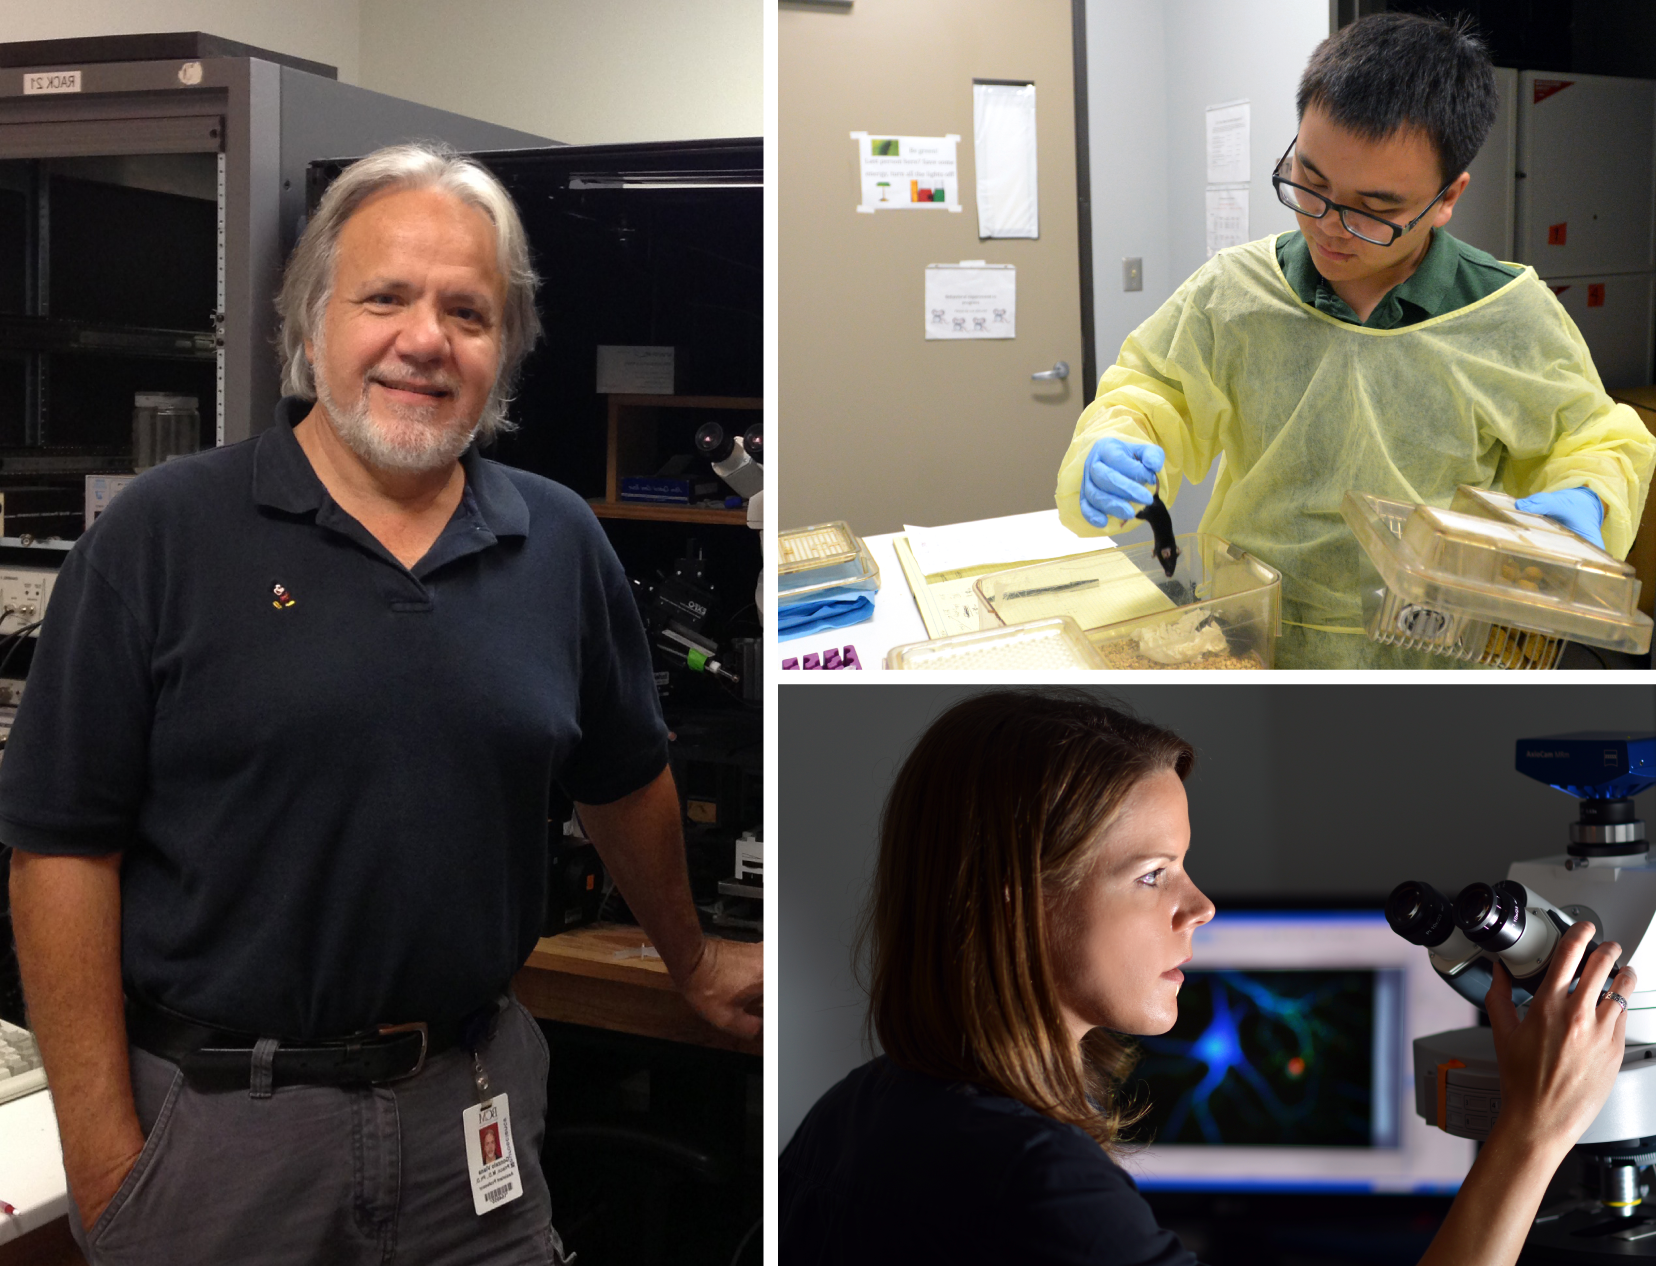 From left: Dr. Gonzalo Viana Di Prisco, assistant professor; Wei Huang, graduate student; Dr. Shelly A. Buffington, postdoctoral fellow, all in the department of neuroscience.